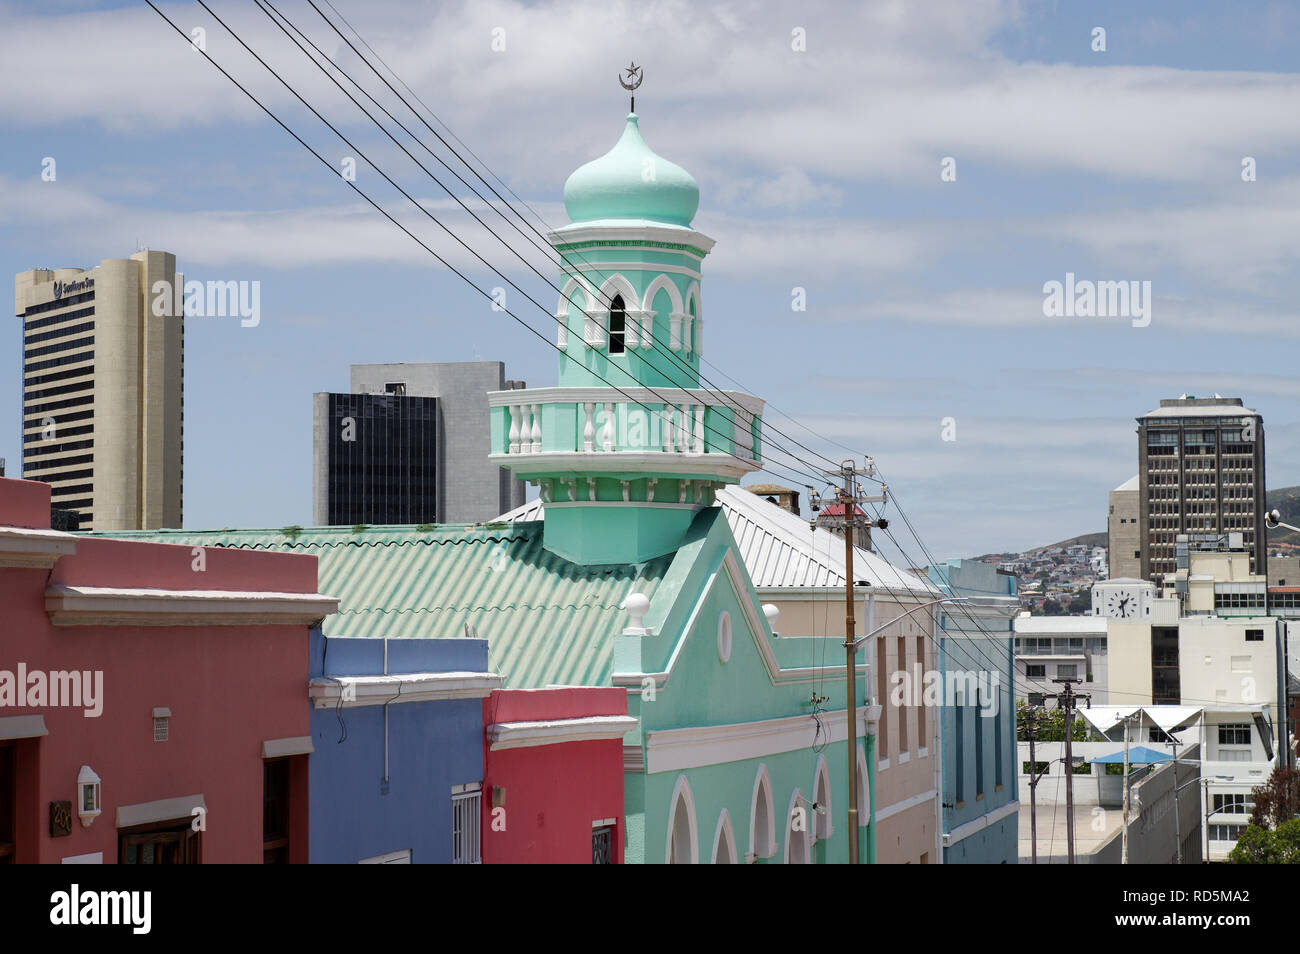 Colourful Bo-Kaap (Malay Quarter) neighbourhood in Cape Town, South Africa Stock Photo